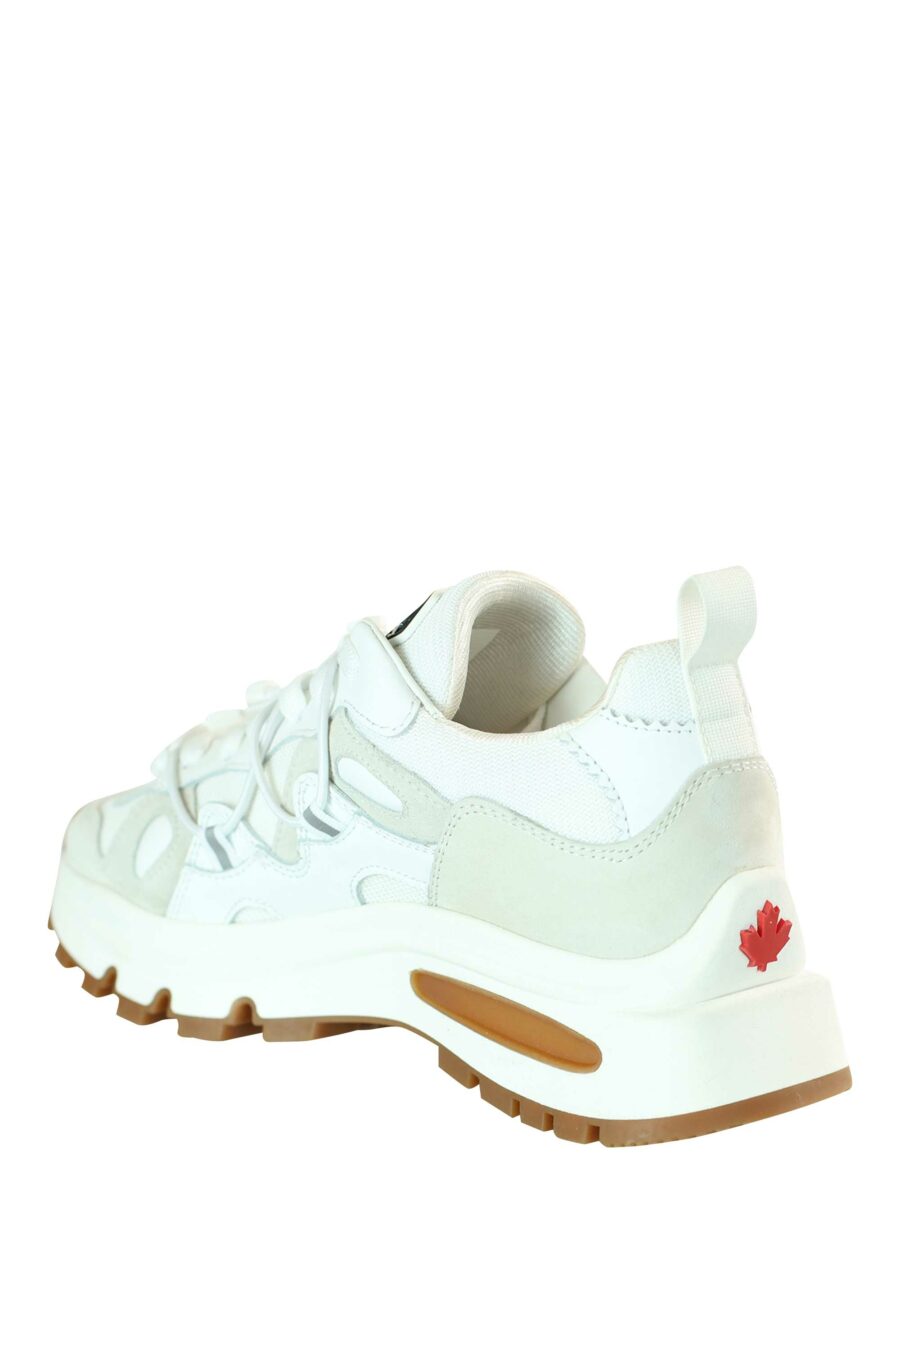 White mix trainers with white platform and brown sole - 8055777195864 4